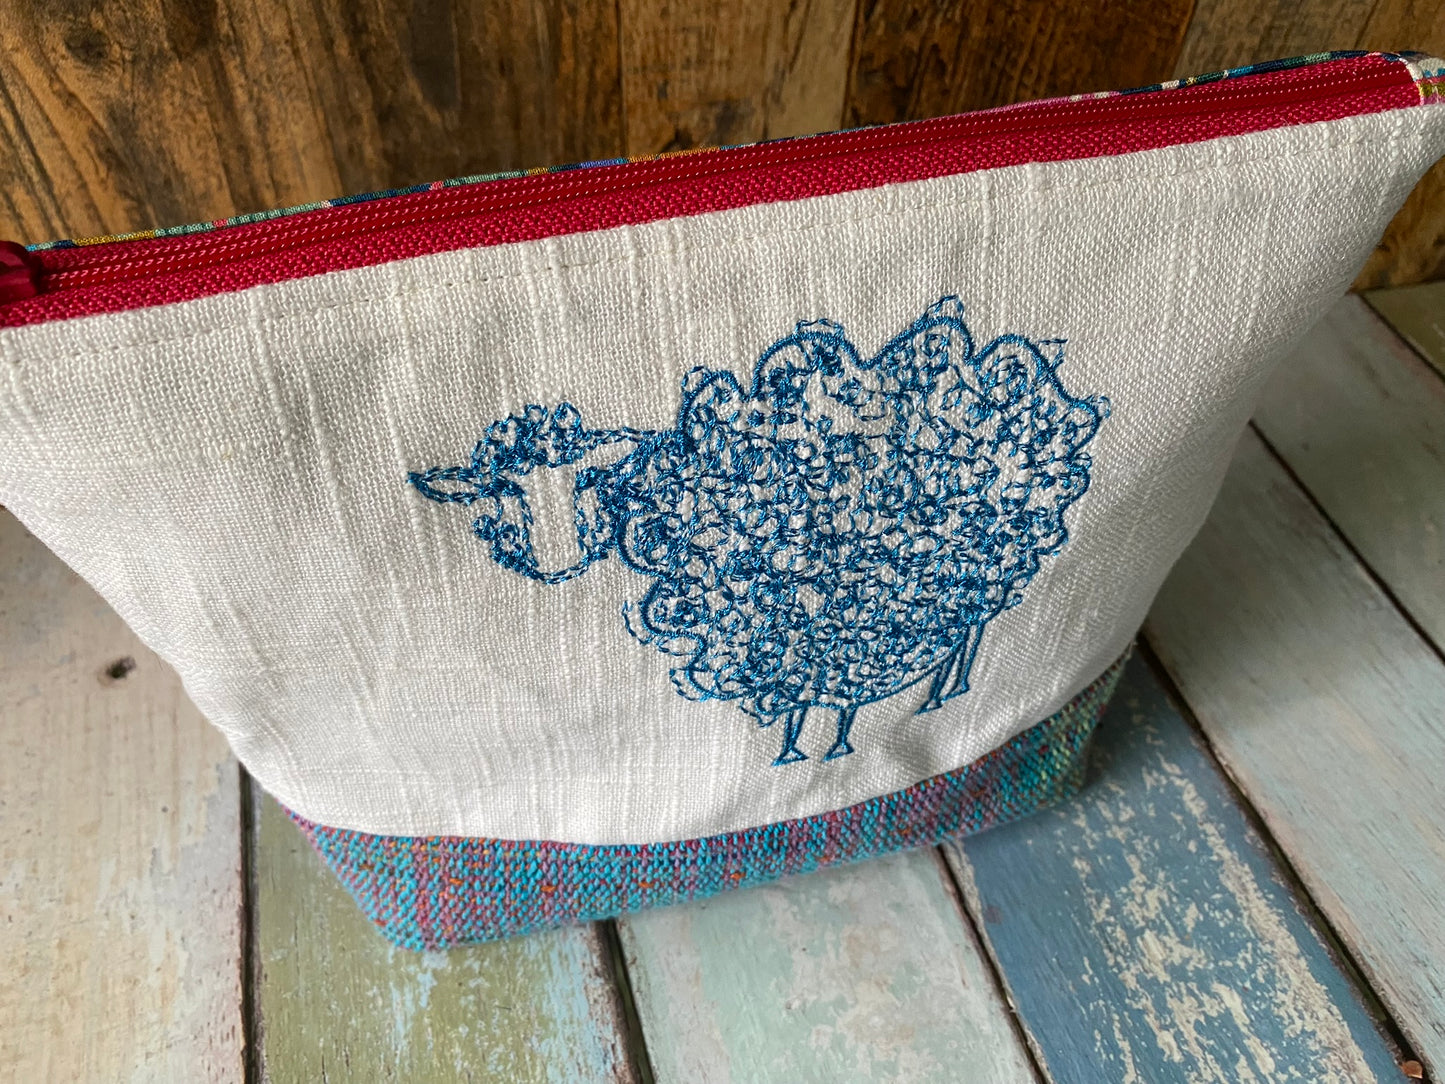 Blue Sheep Project or Cosmetic Zipper Bag